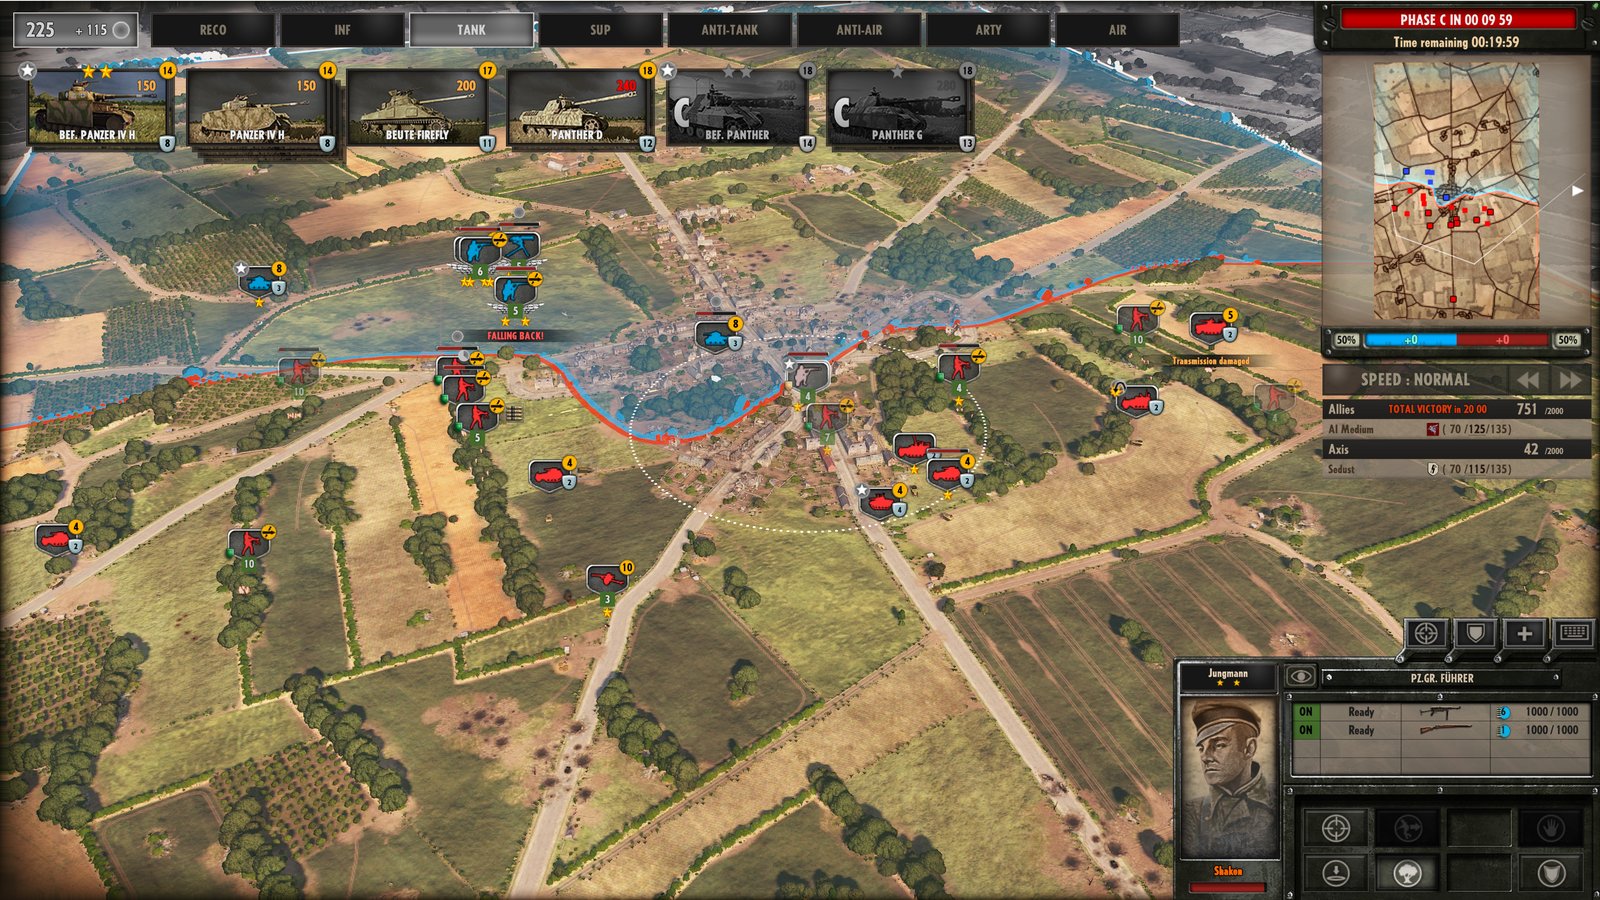 Steel Division: Normandy 44